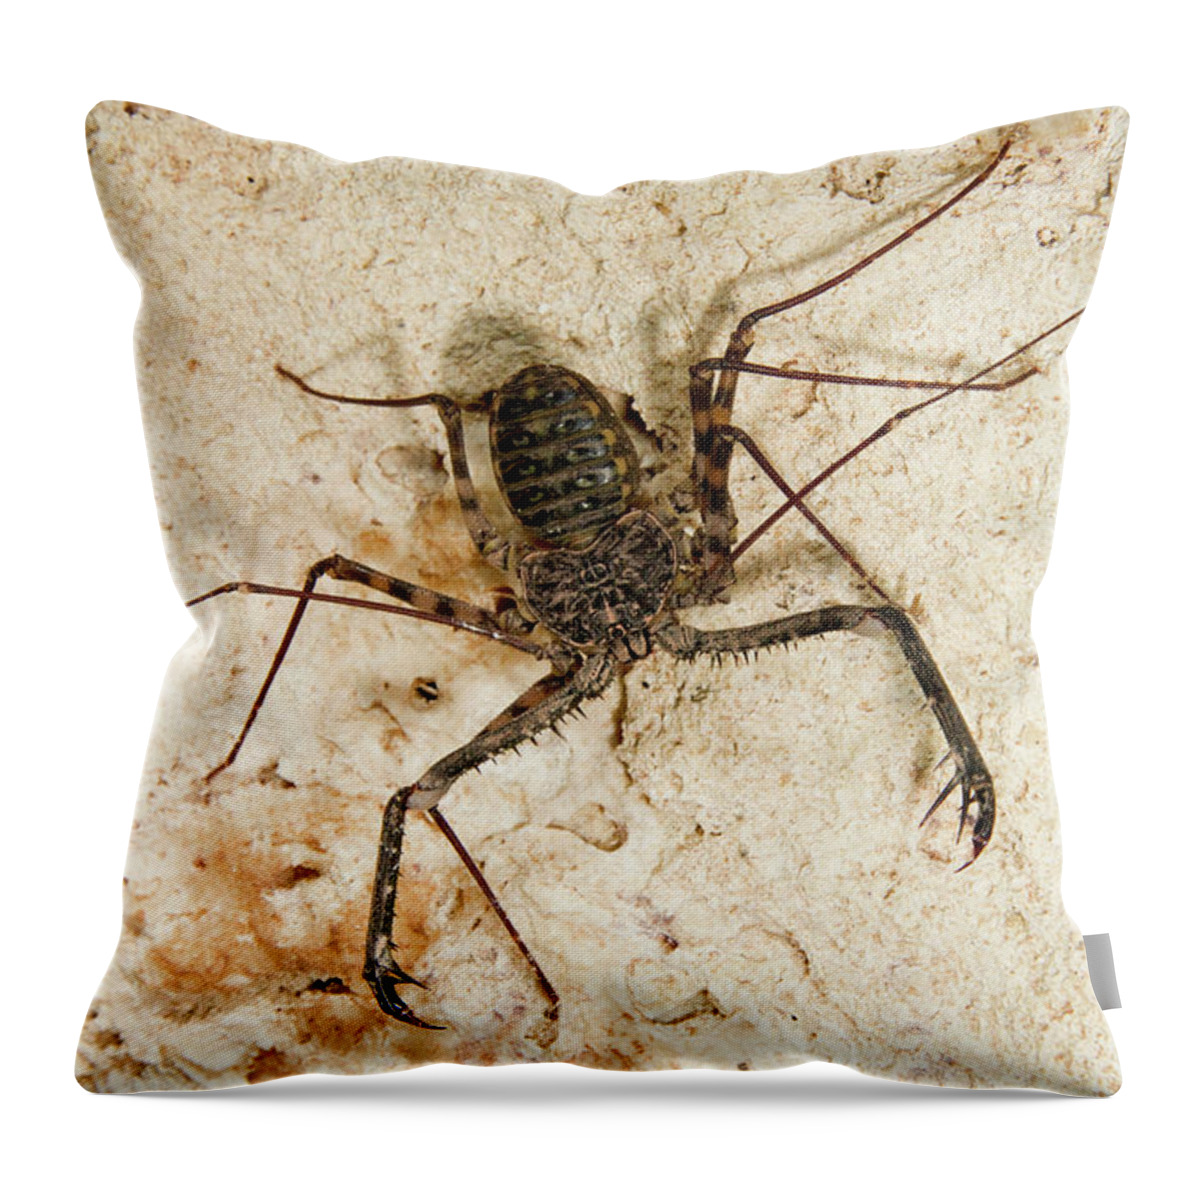 Africa Throw Pillow featuring the photograph Tailless Whip Scorpion by Ivan Kuzmin